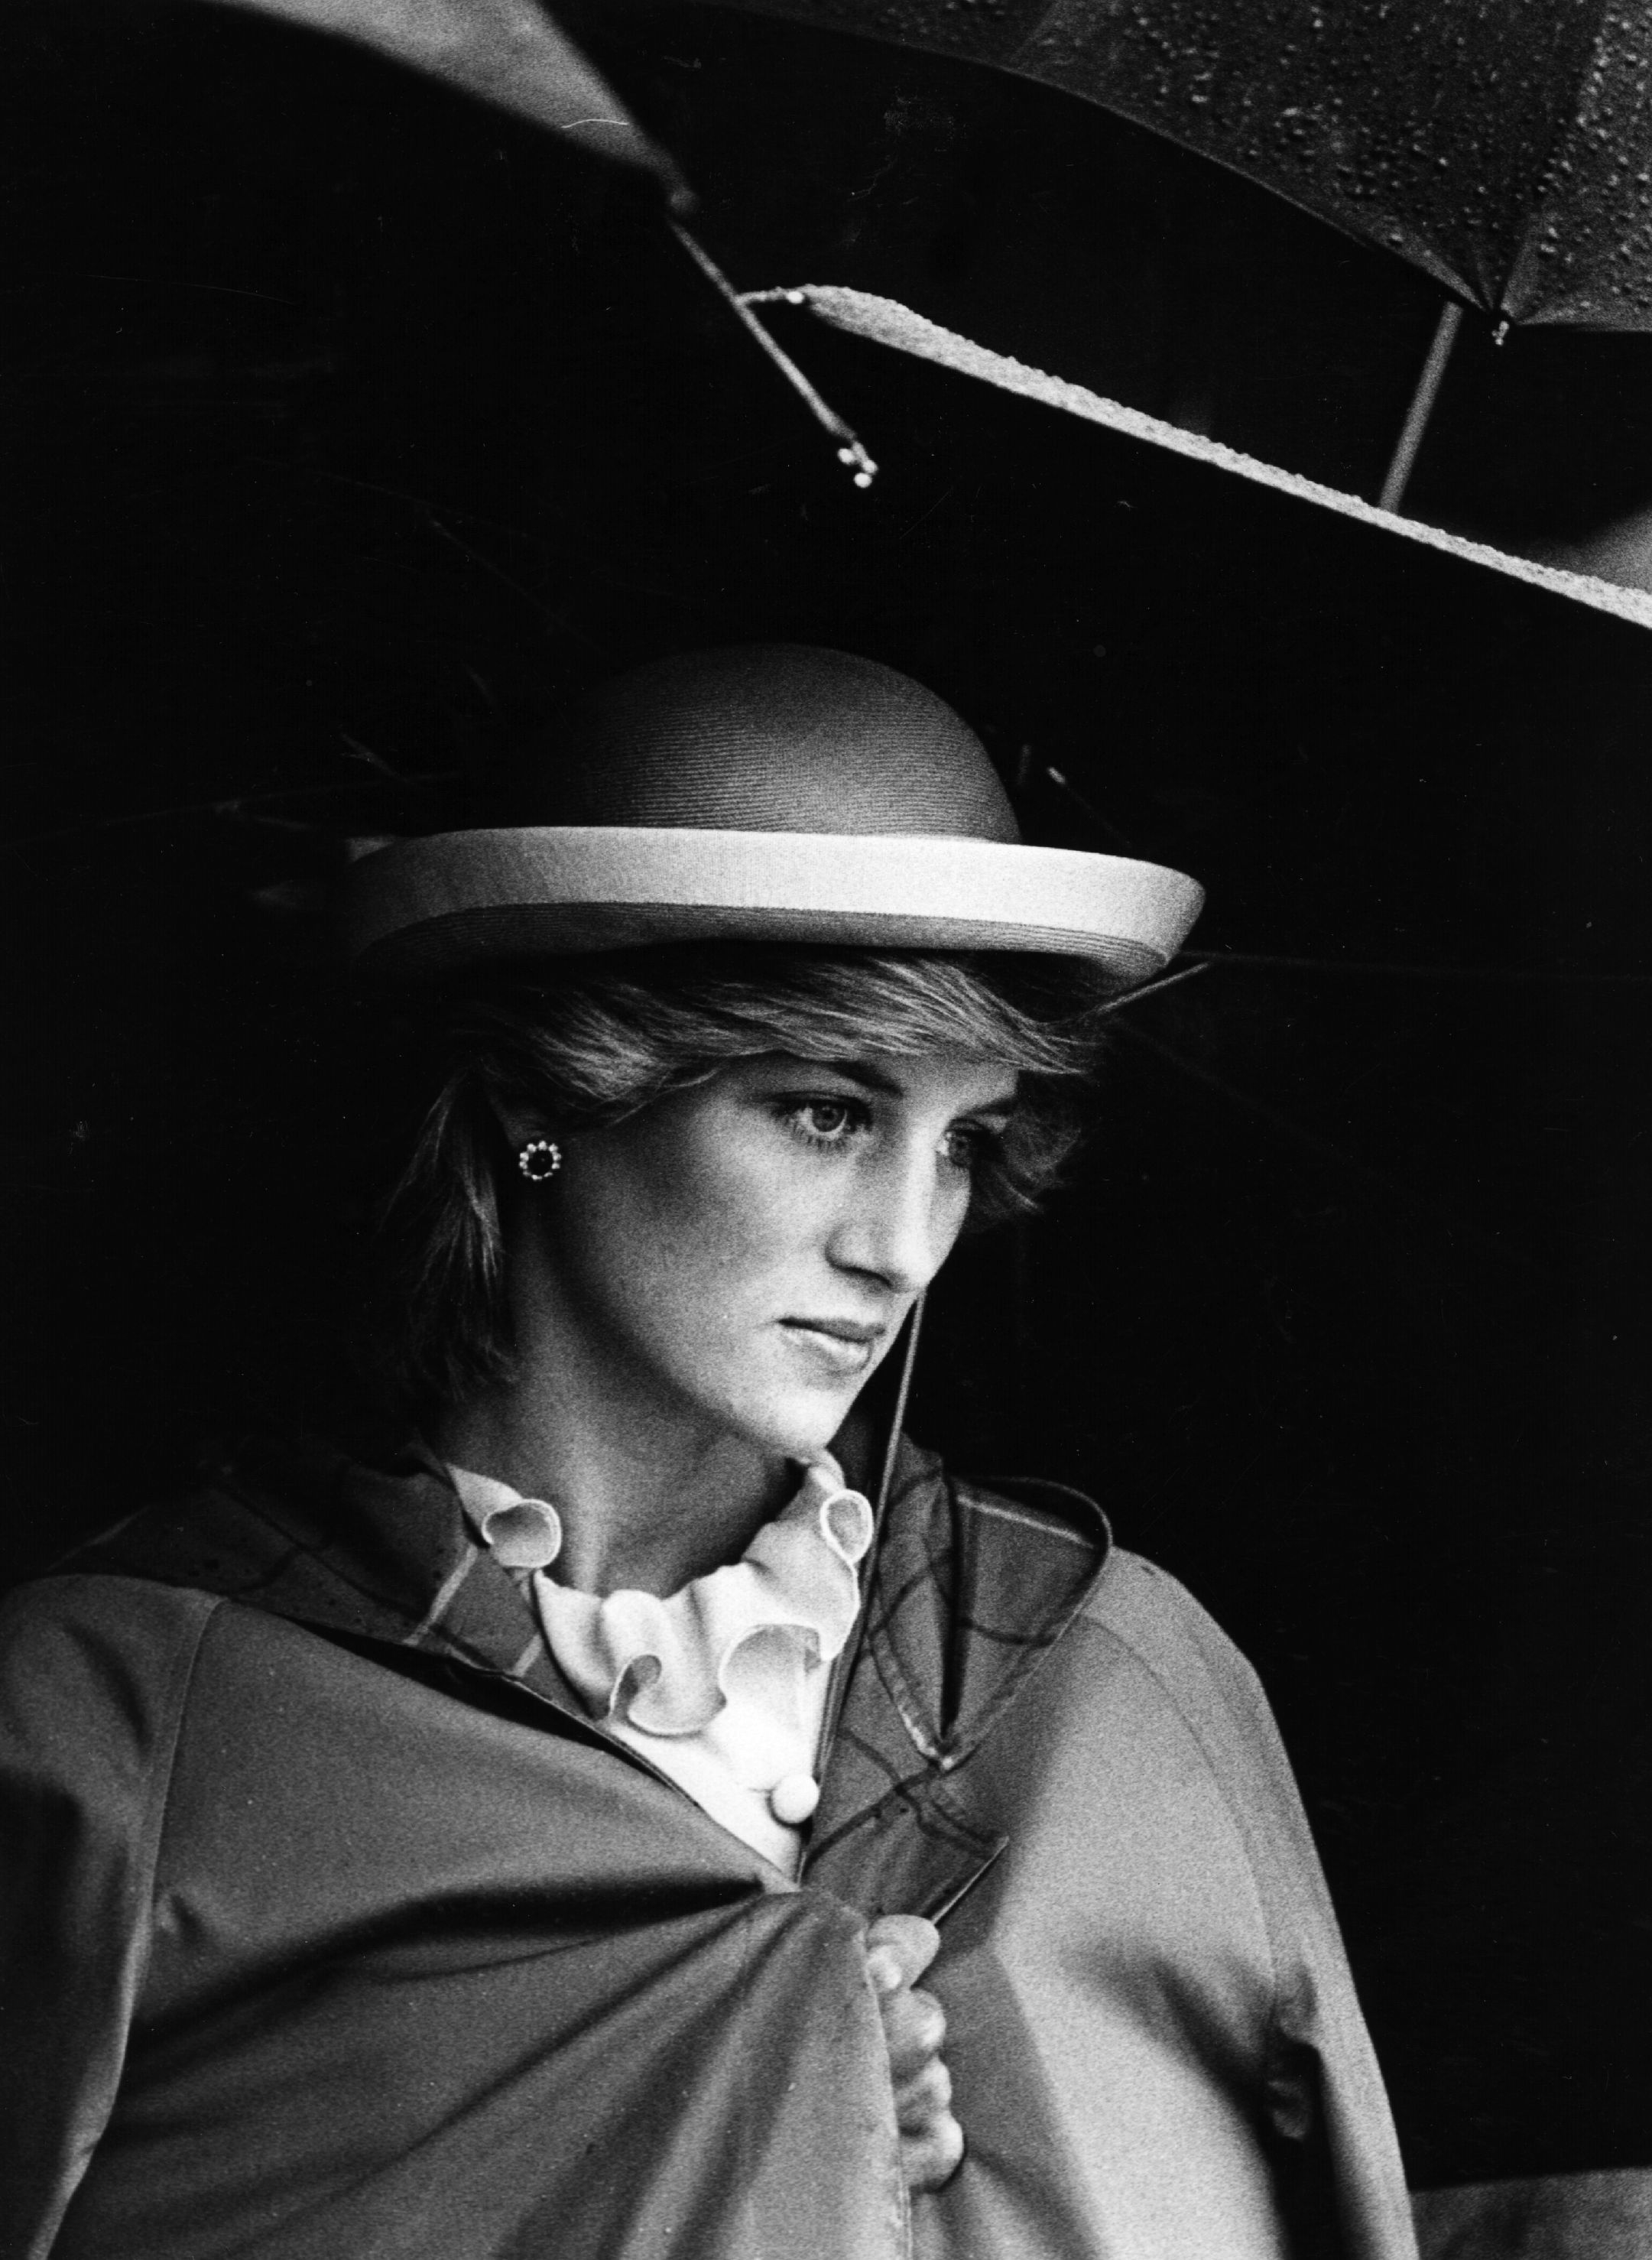 Princess Diana pictured under an umbrella. 1983. | Photo: Getty Images